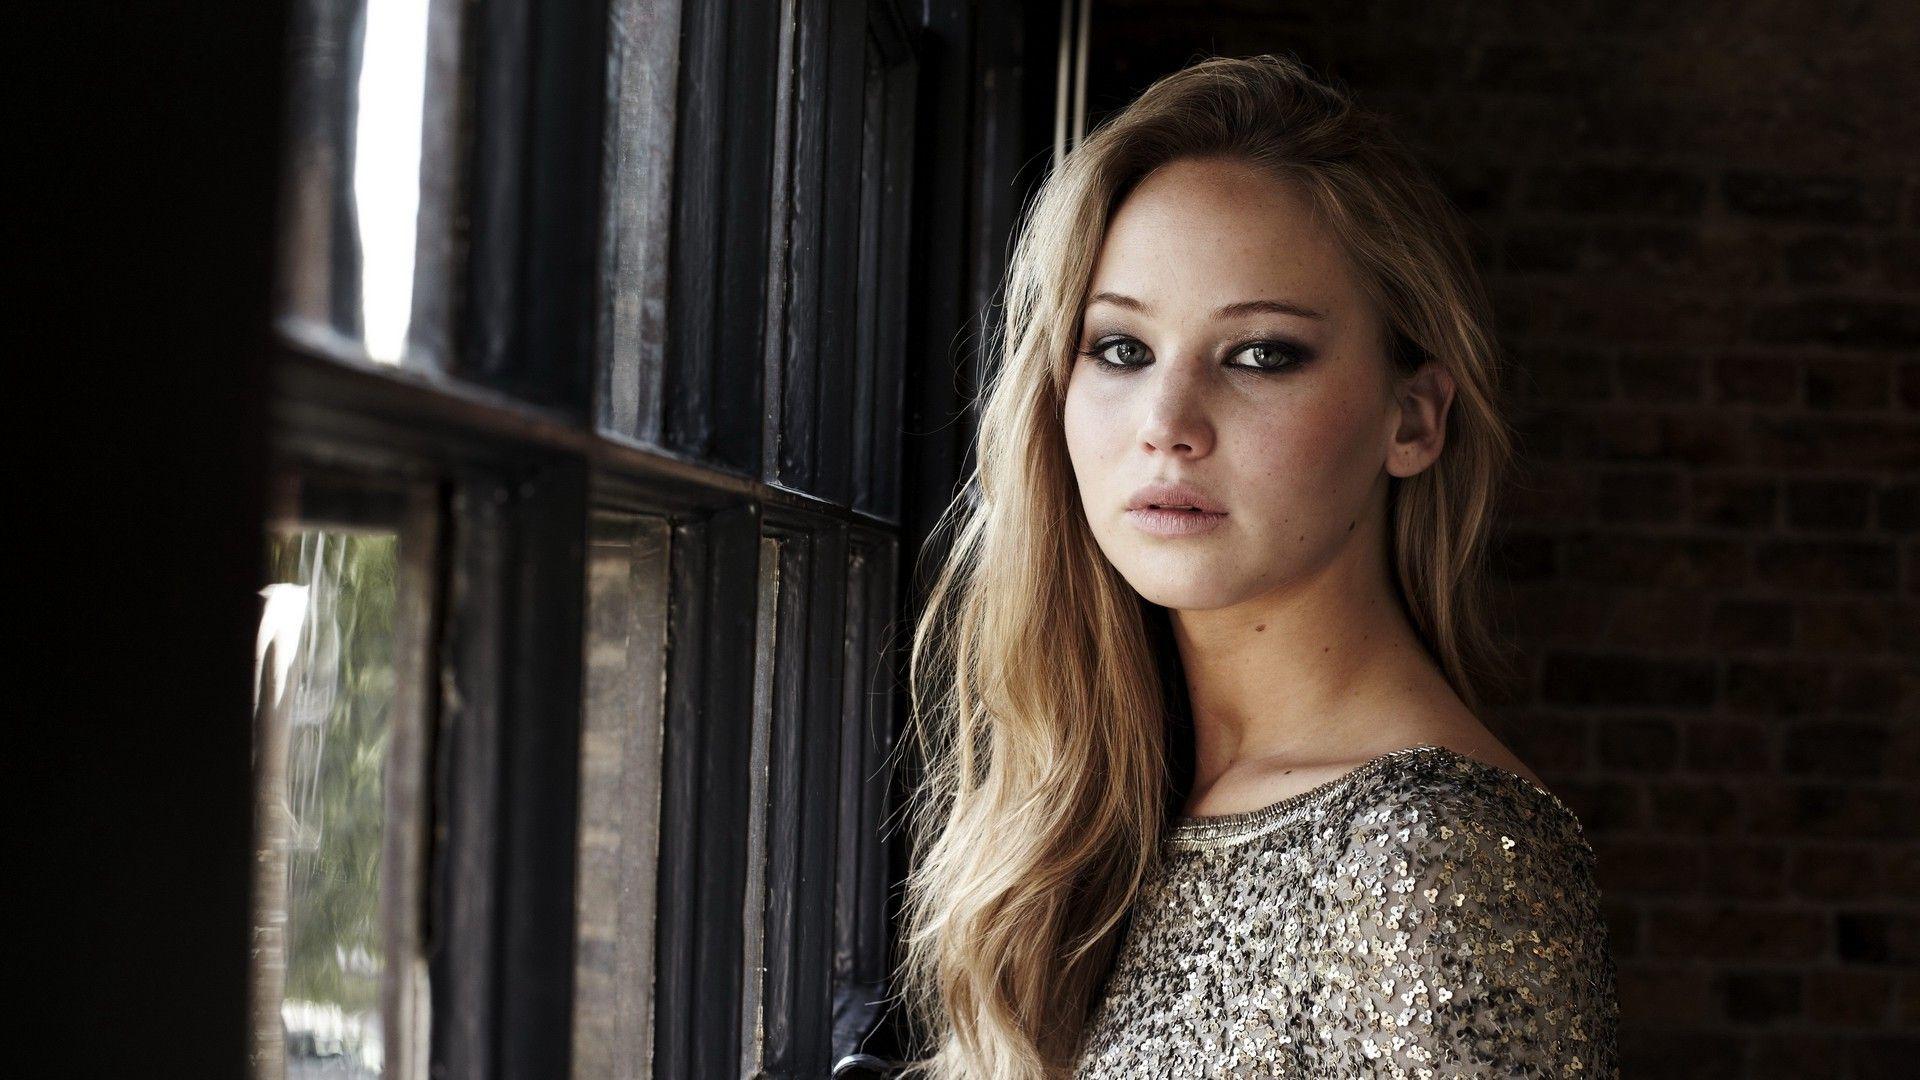 Jennifer Lawrence Wallpaper High Resolution and Quality Download